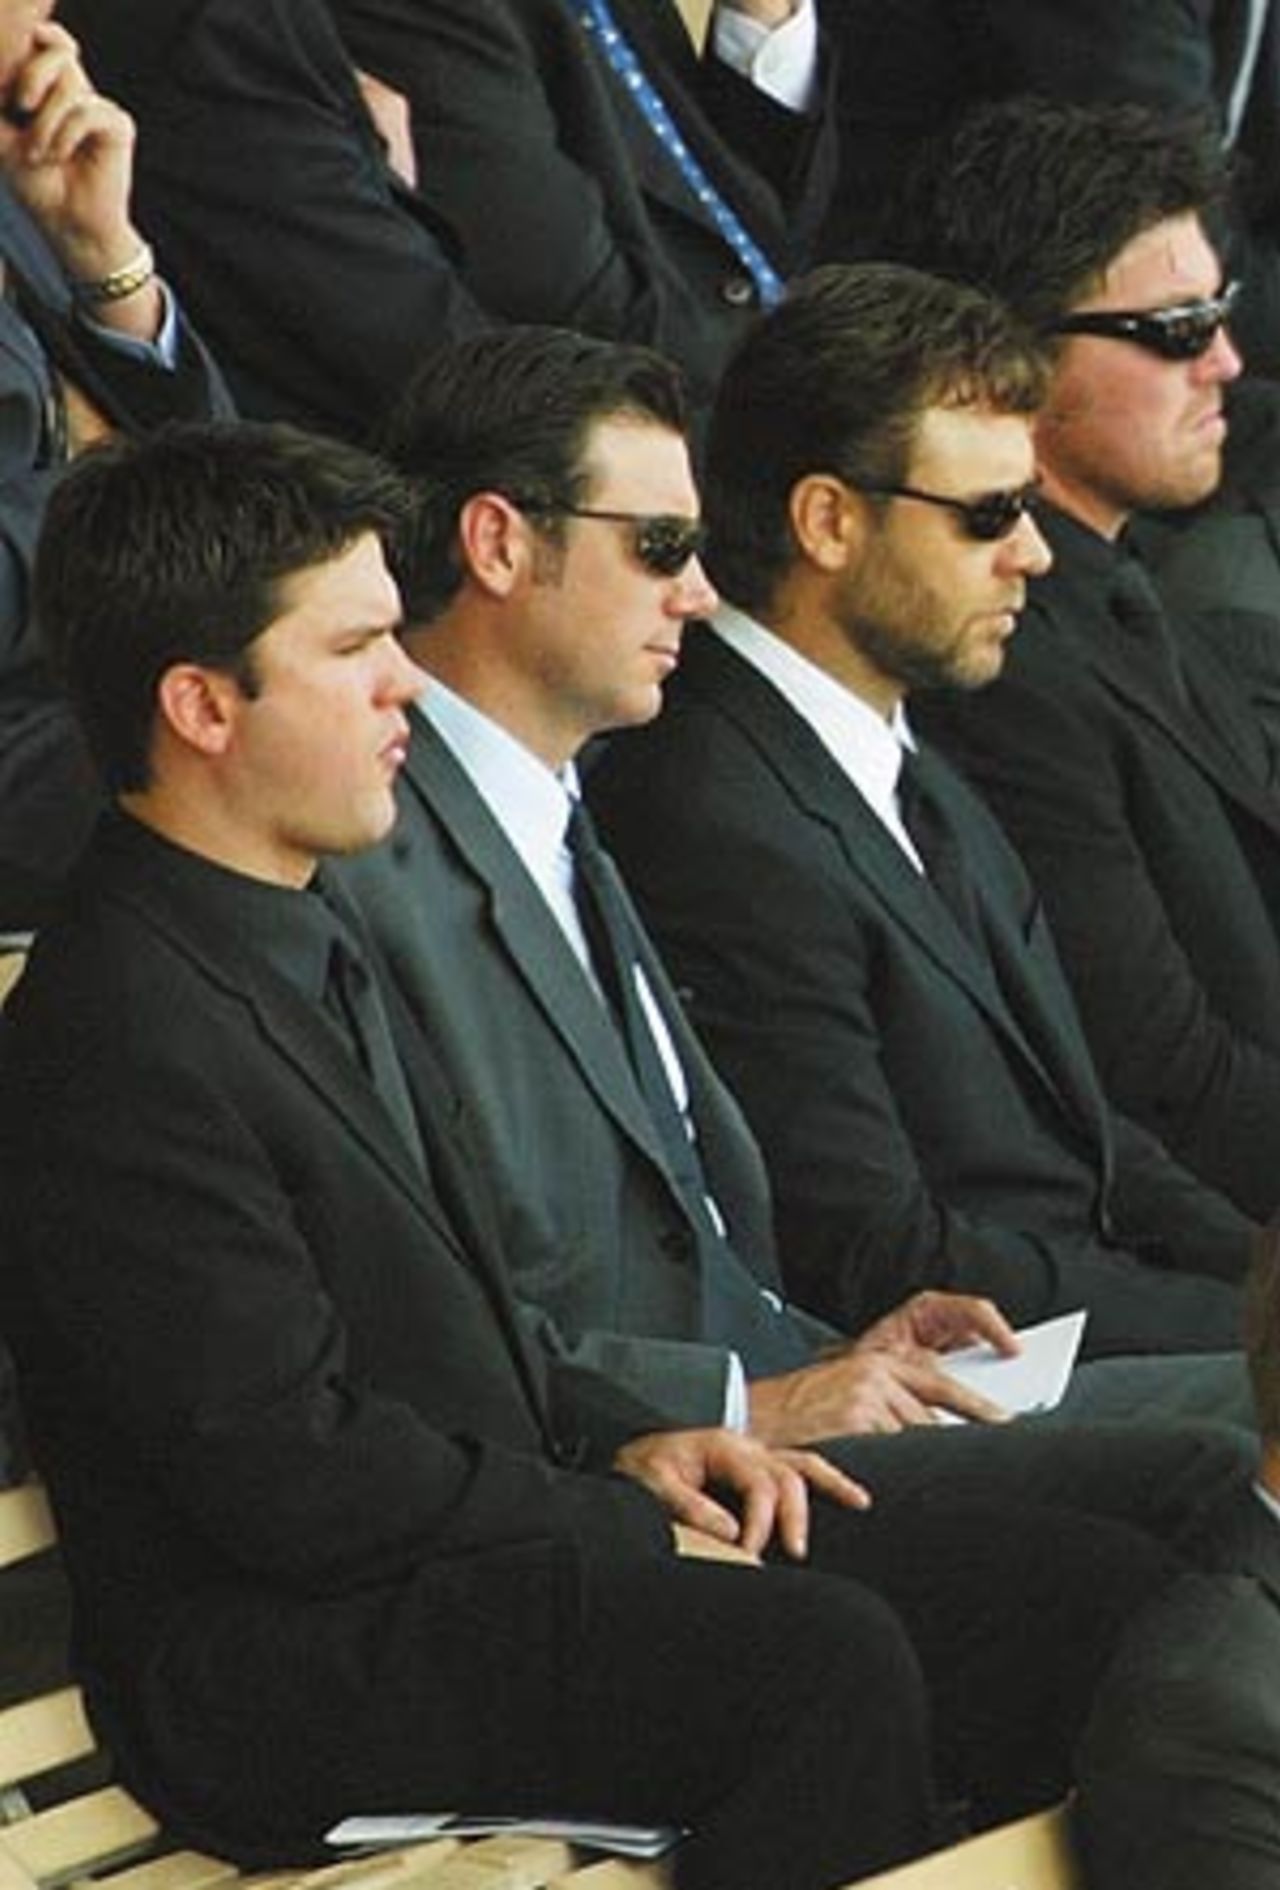 Russell Crowe, the actor, is a part of the large audience, Adelaide, January 27, 2004